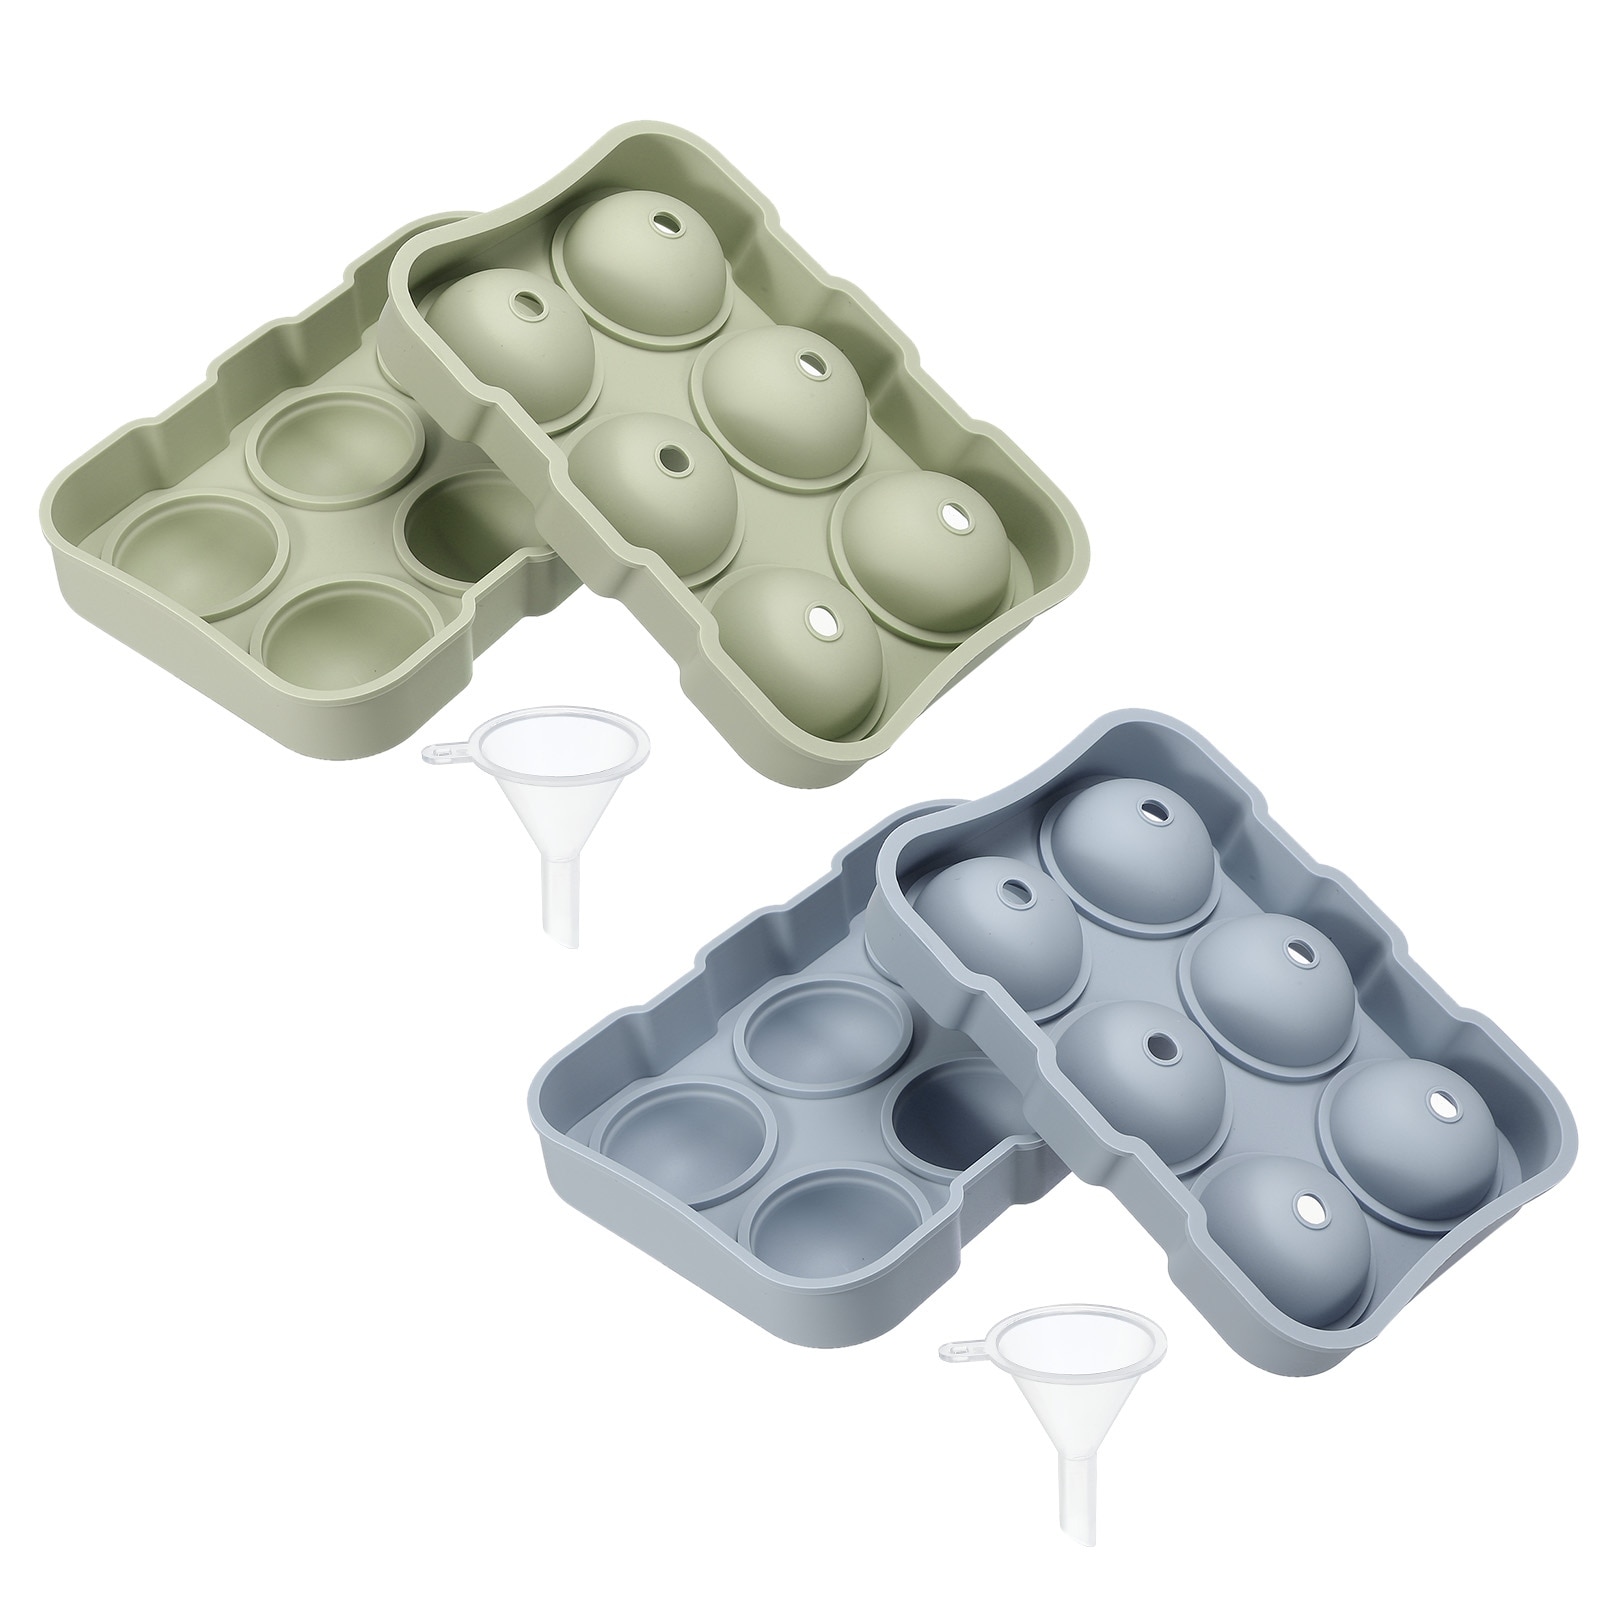 Unique Bargains 6x2 inch Ice Ball Maker,Set of 2 Round Ice Tray for Cocktails(Green,Blue) - Green,Blue